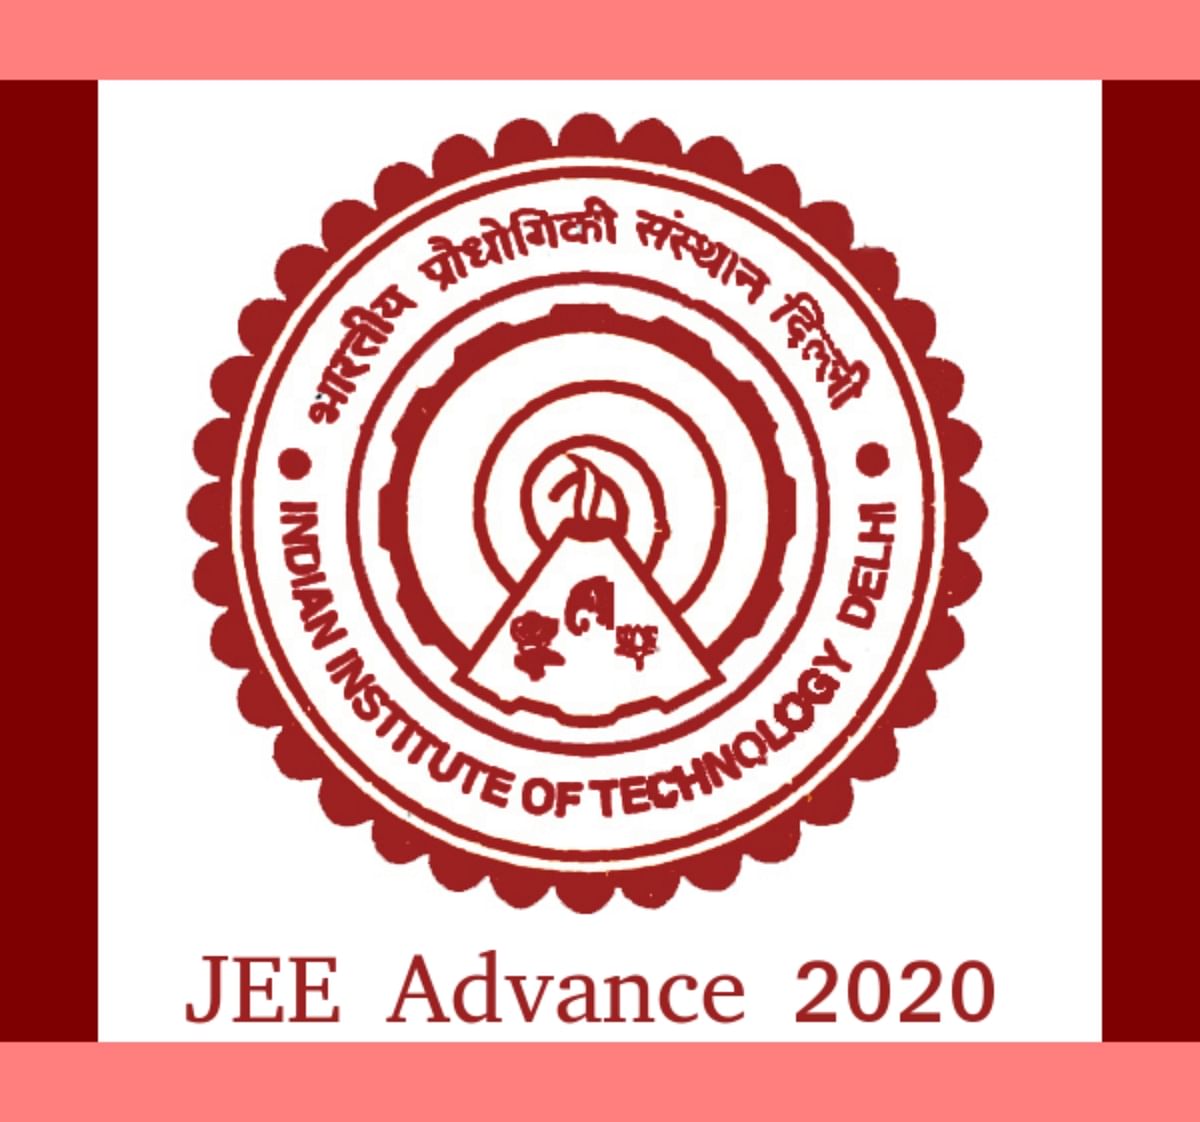 JEE Advanced 2020: No Change in the Syllabus This Year, Confirms IIT Delhi